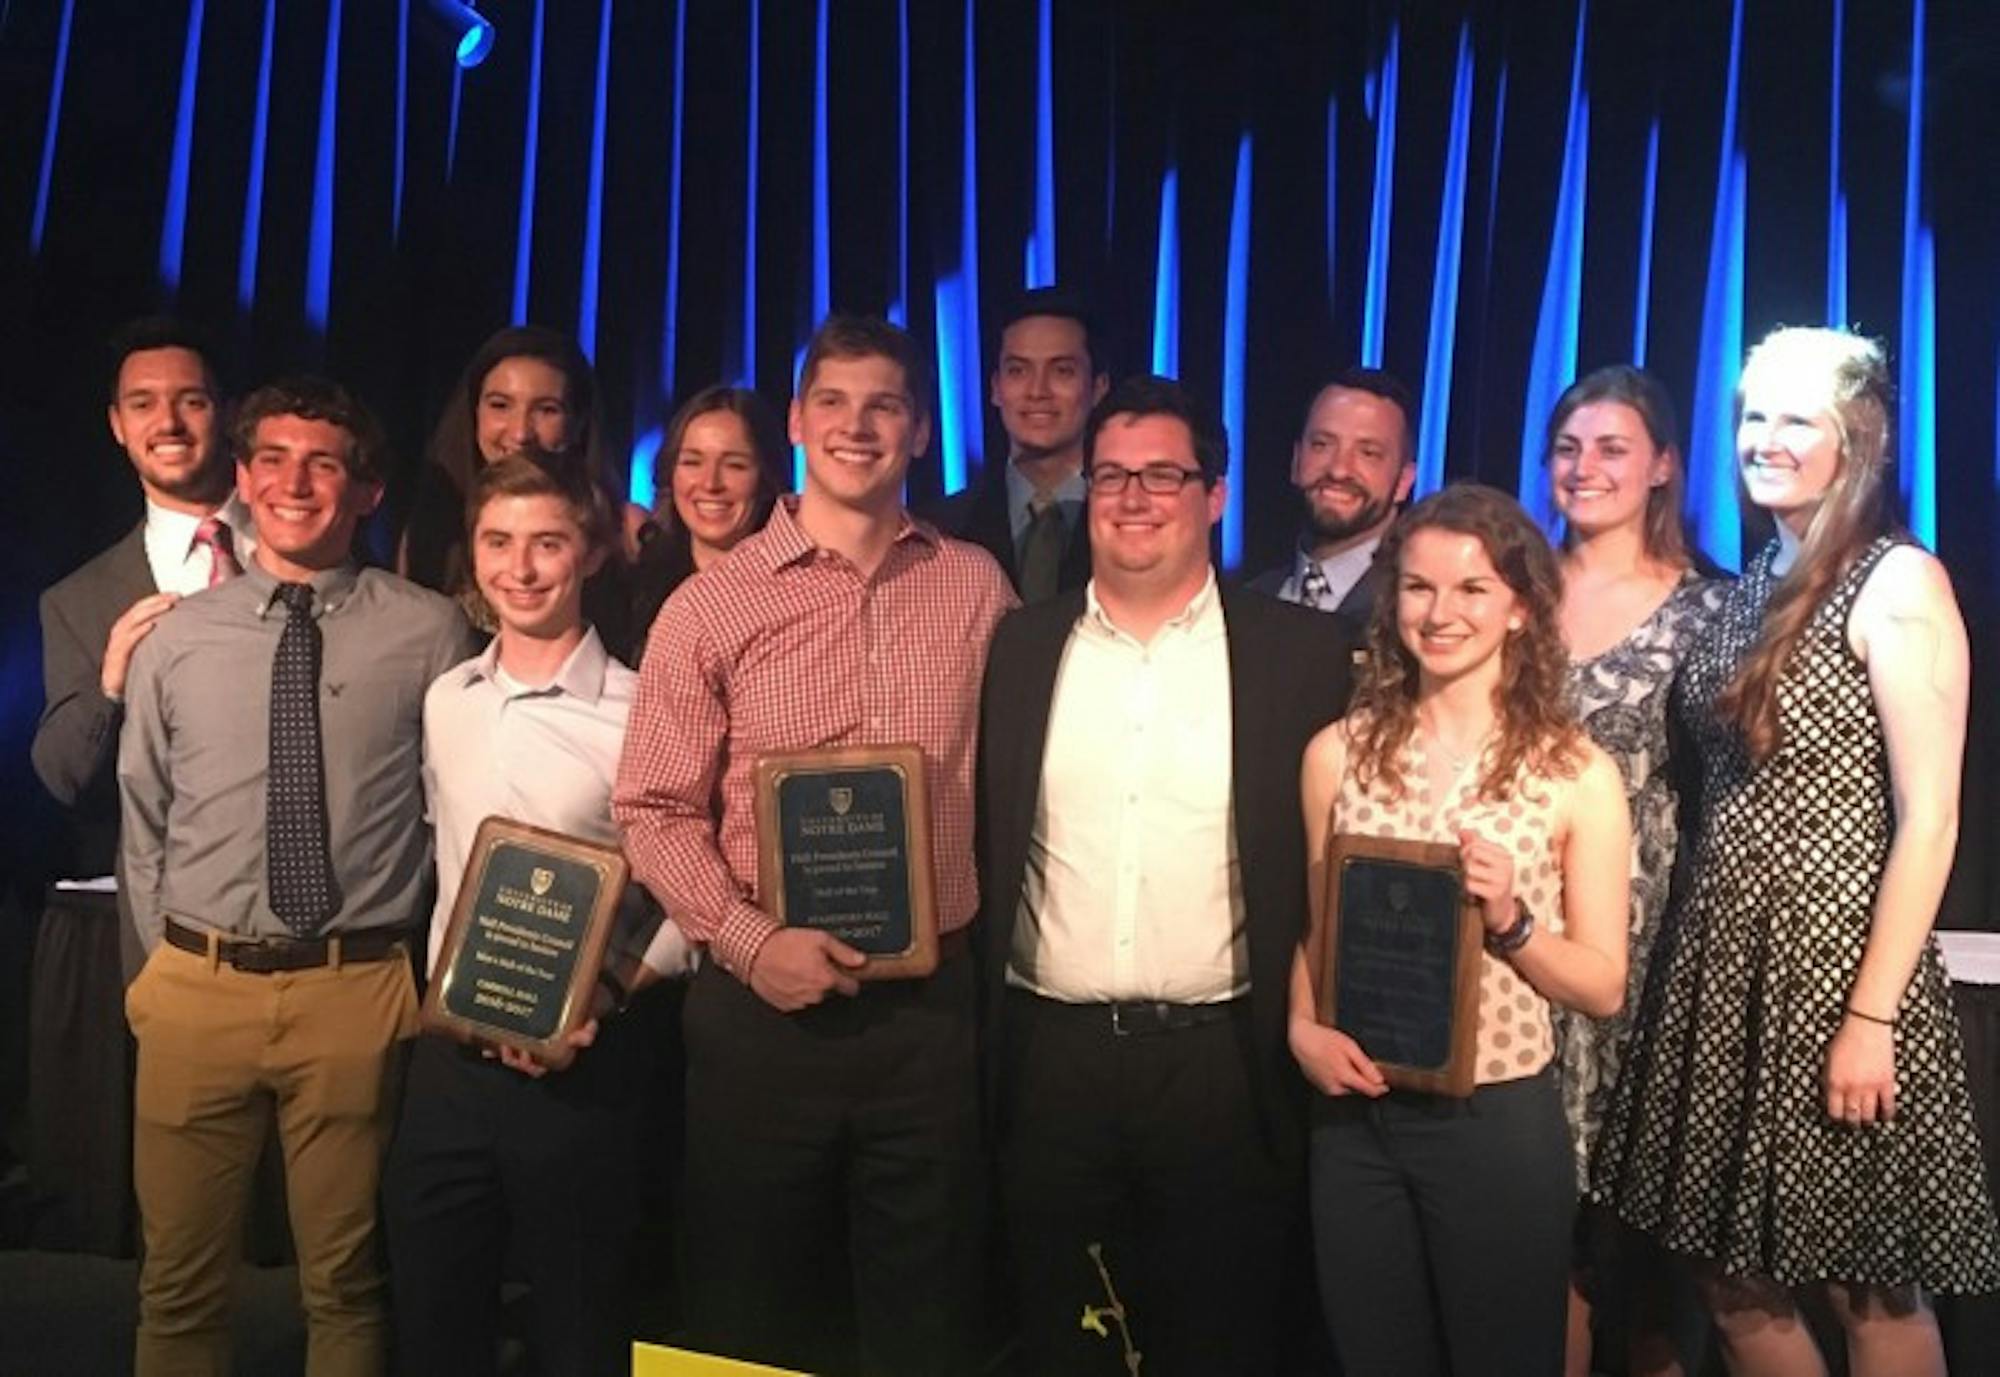 Members of the three winning halls, Stanford, Farley and Carroll, pose with plaques honoring their dorms’ achievements. The Hall of the Year winners were announced in an event held at Legends.